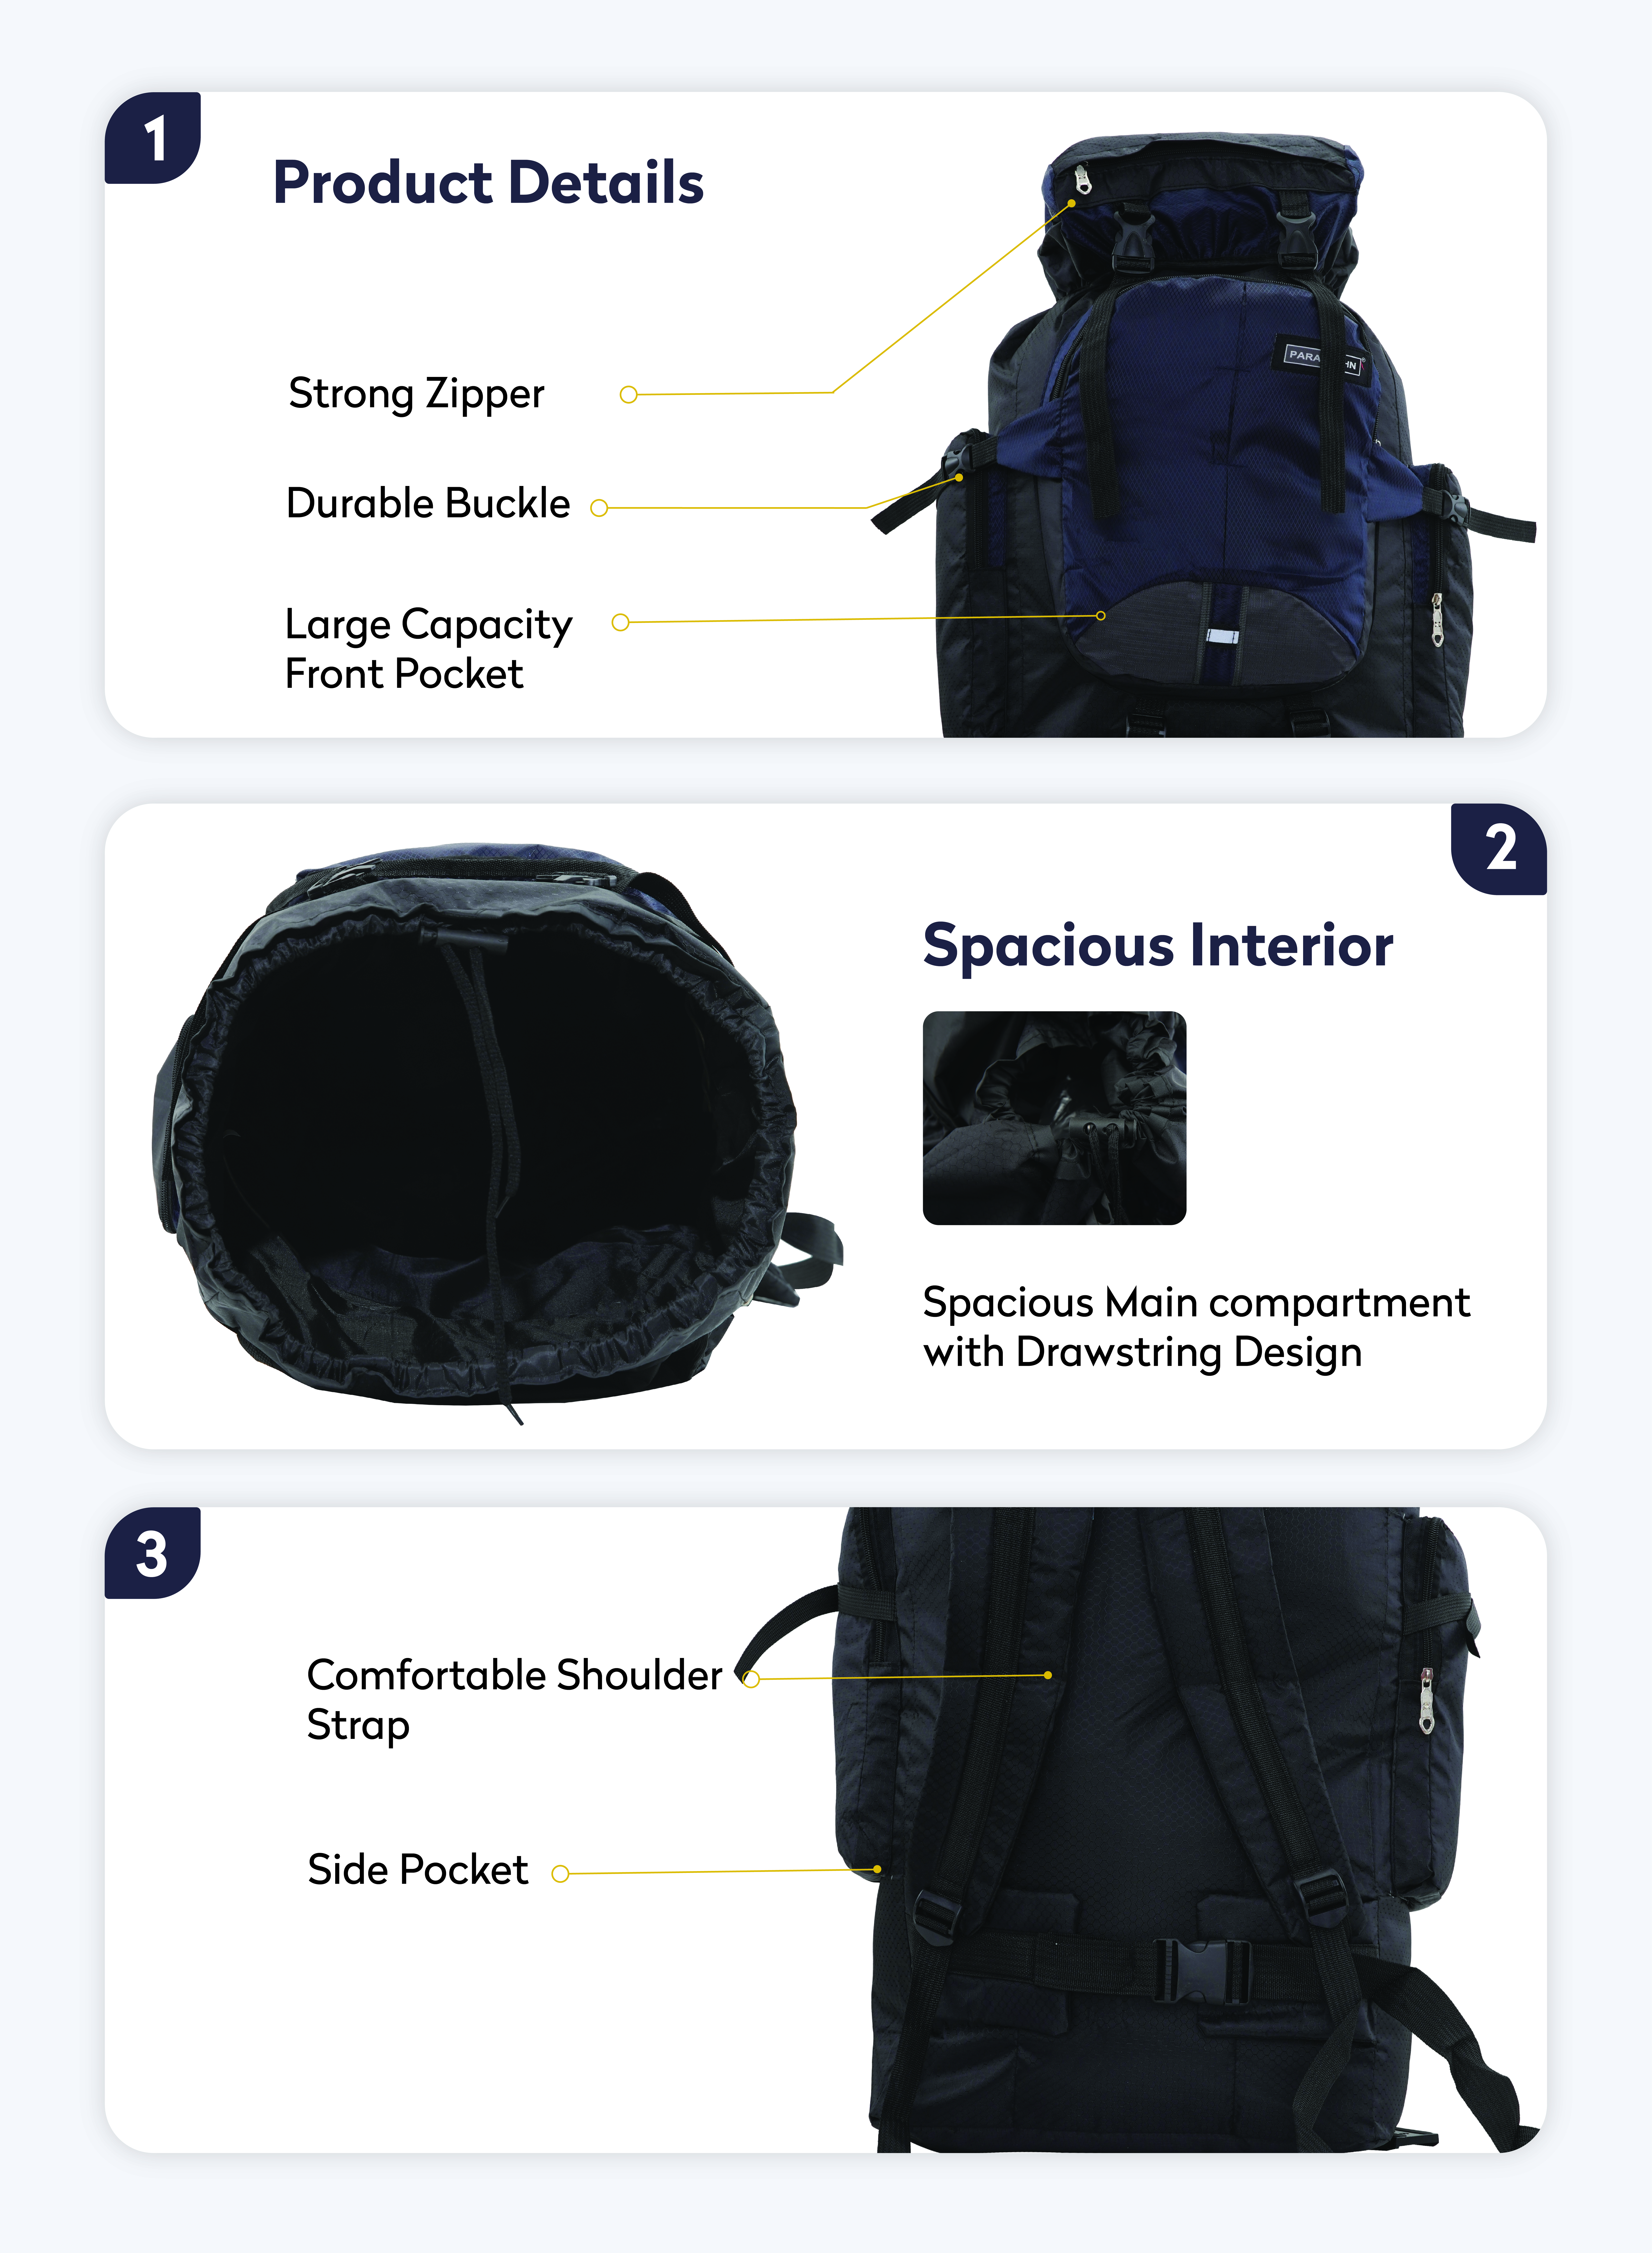 Para John Top Class Mountain Bag, perfect travel partner, multipurpose bags suits for trips and trekking, unisex heavy backpacks